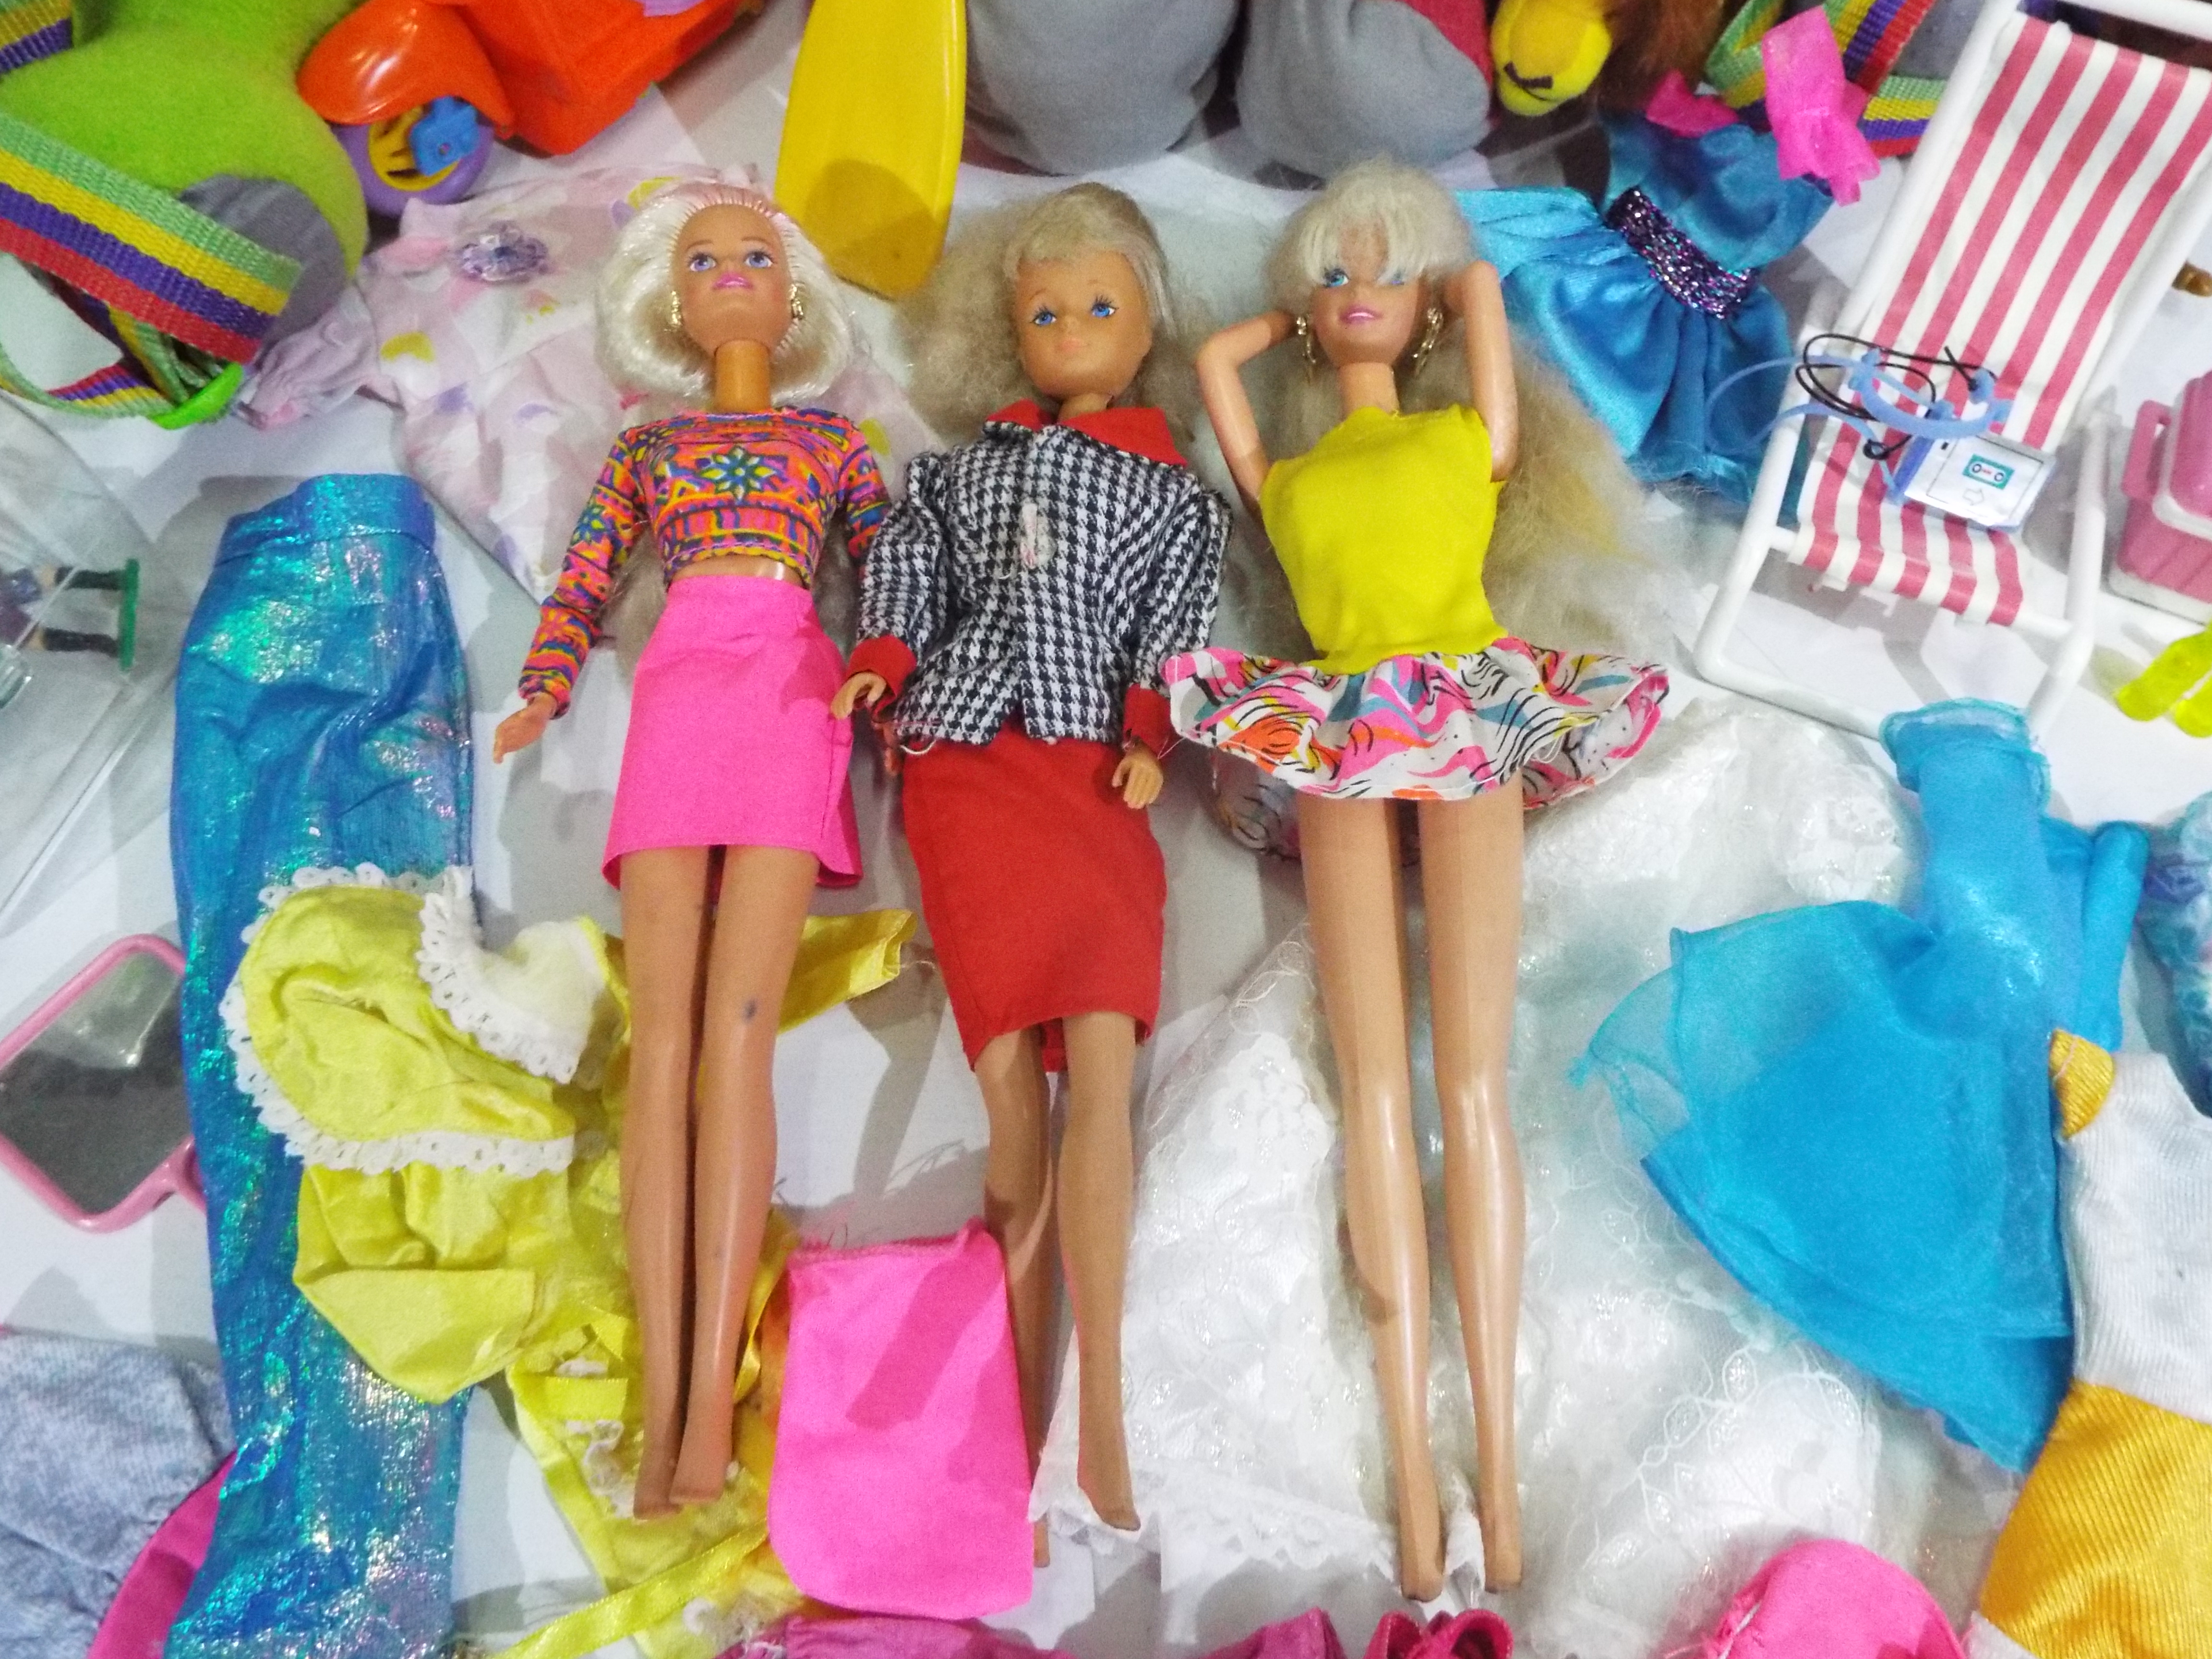 Mattel, Hasbro, Teletubbies - Two Barbie dolls, an unknown maker doll, and Barbie accessories, - Image 2 of 6